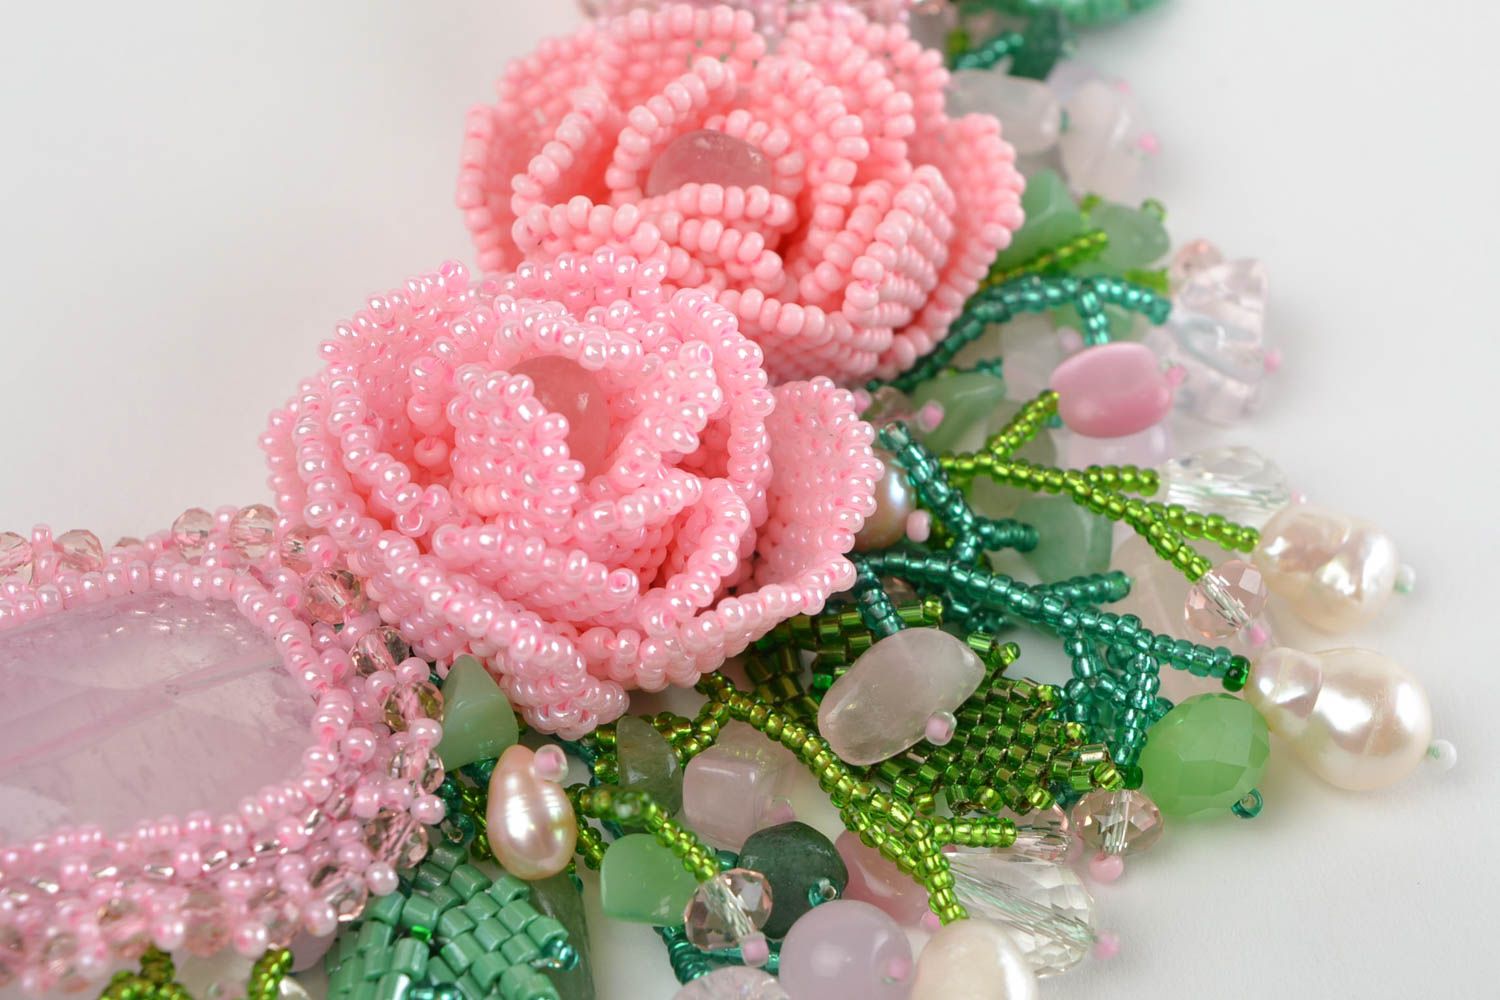 Beautiful handmade designer flower necklace woven of beads and natural stones photo 4